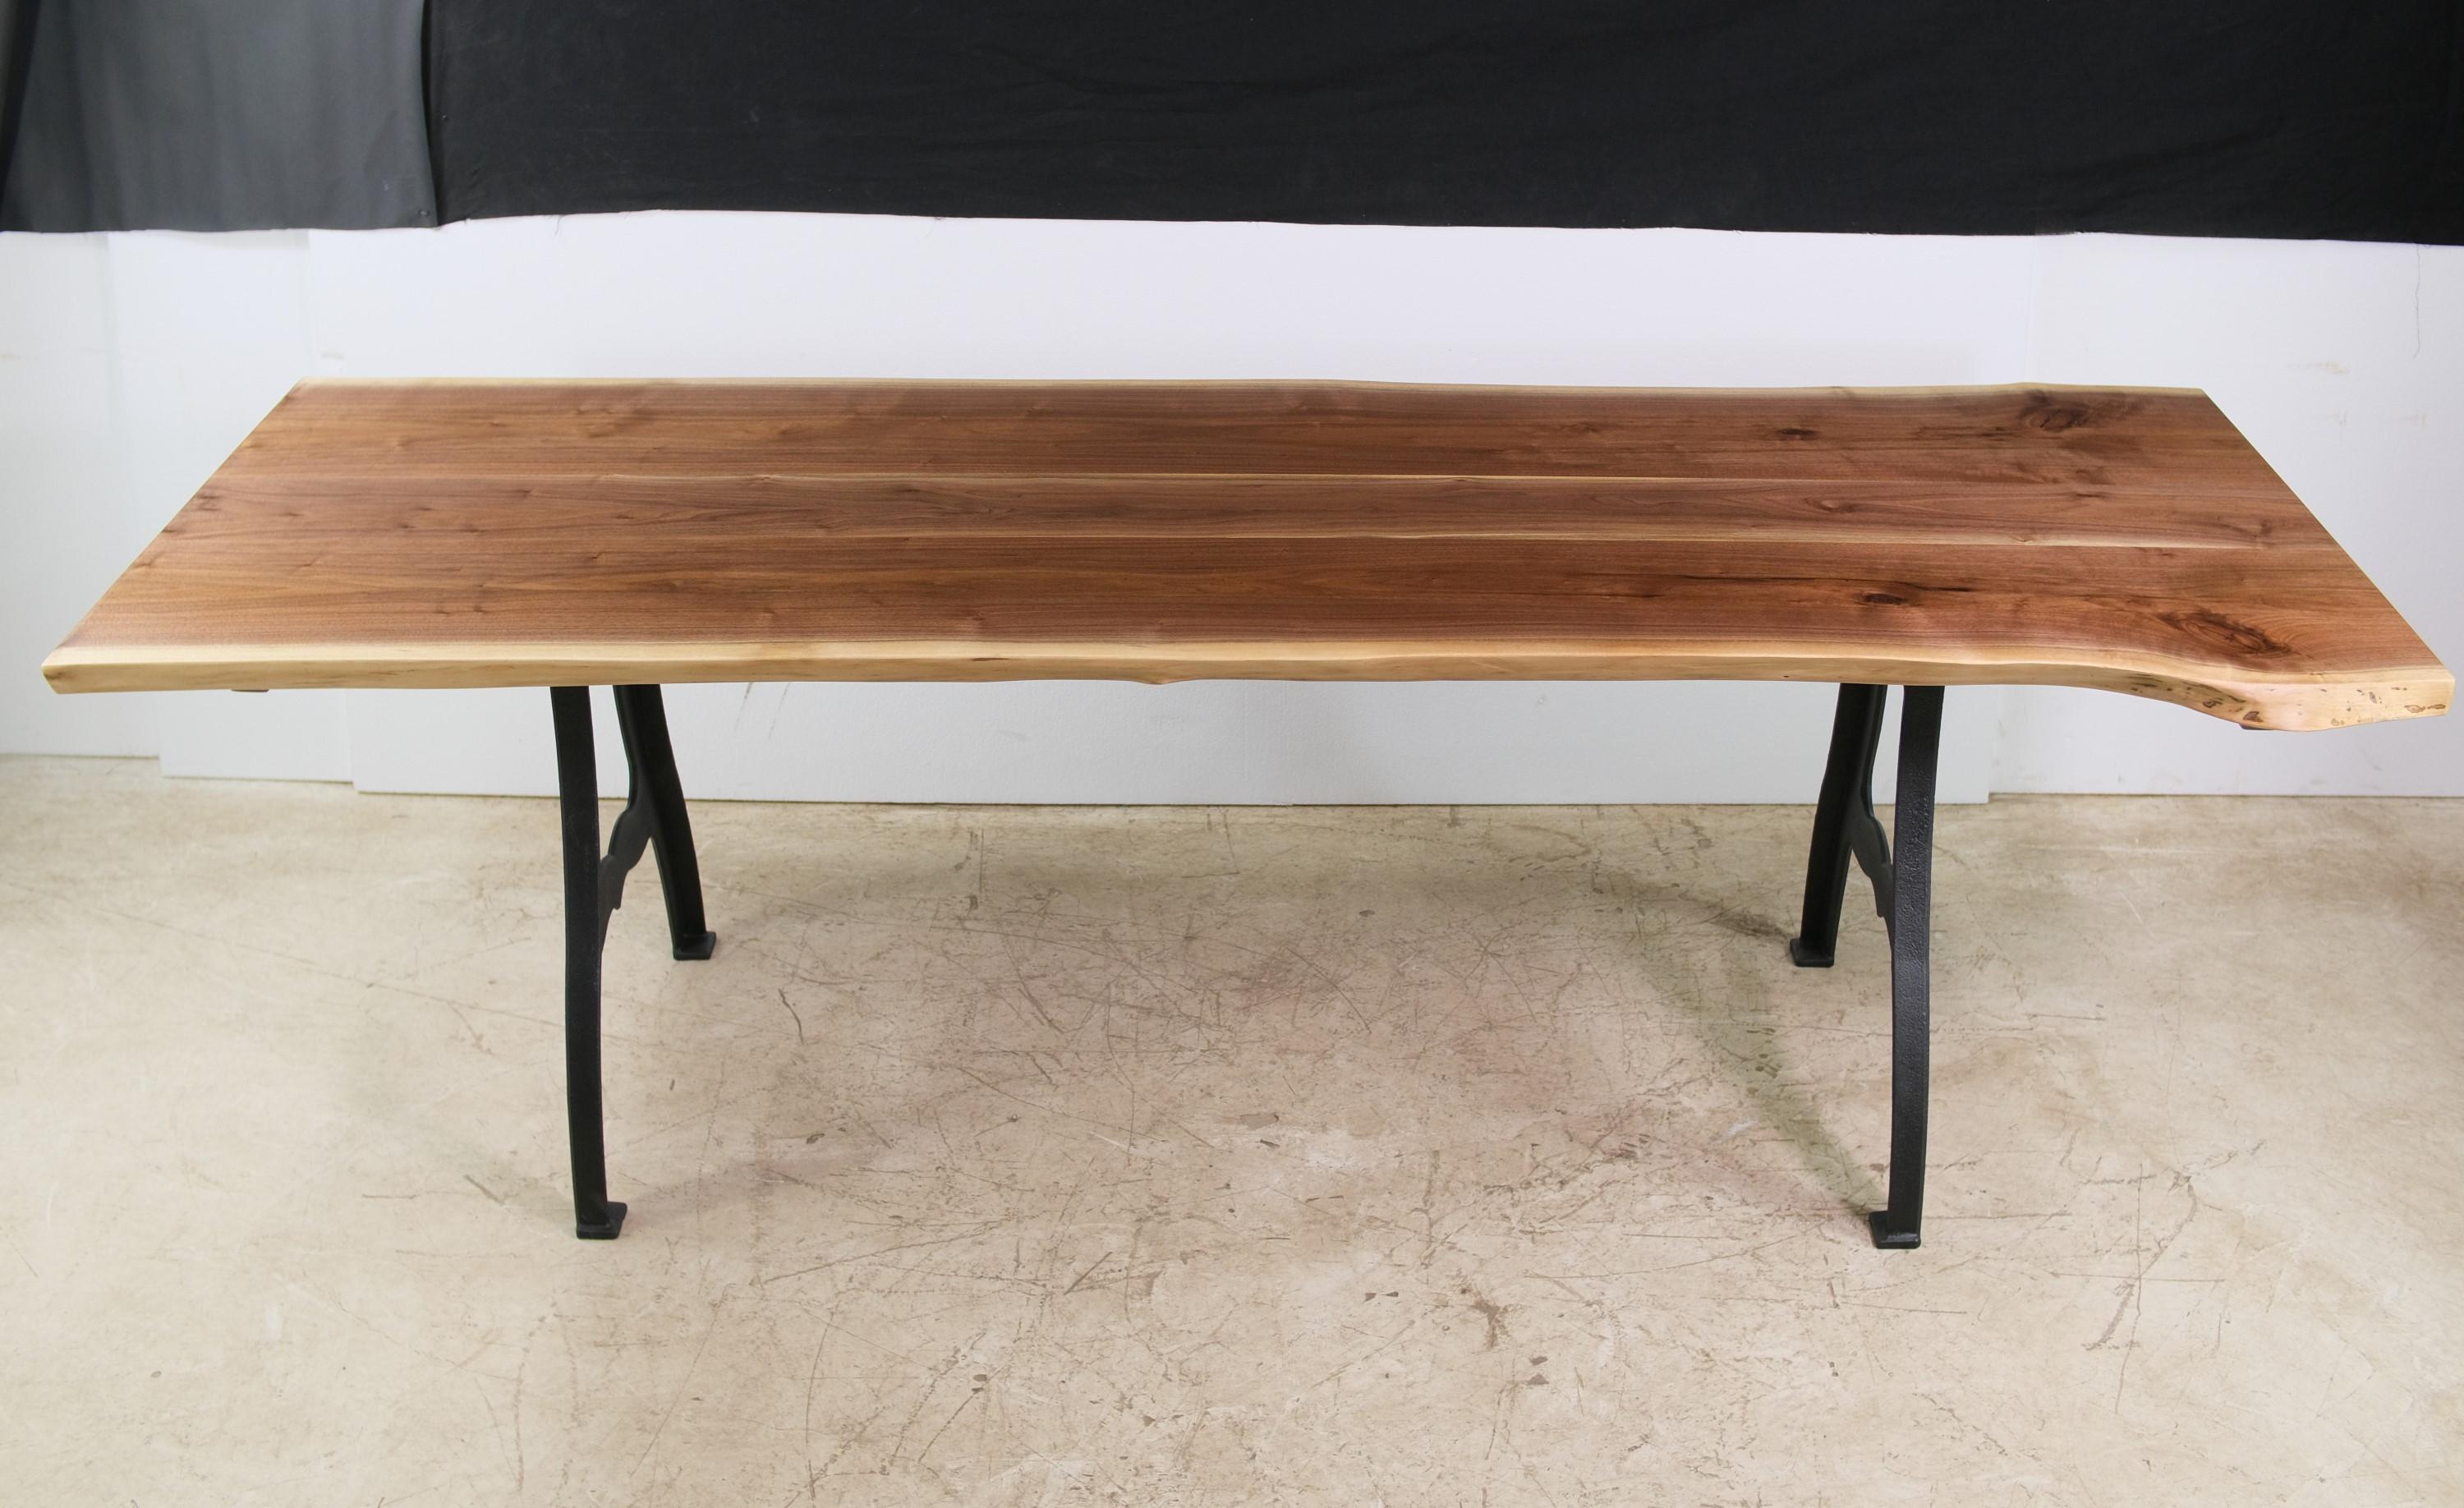 Iron Bookmatched Live Edge Walnut Table Industrial New York Legs